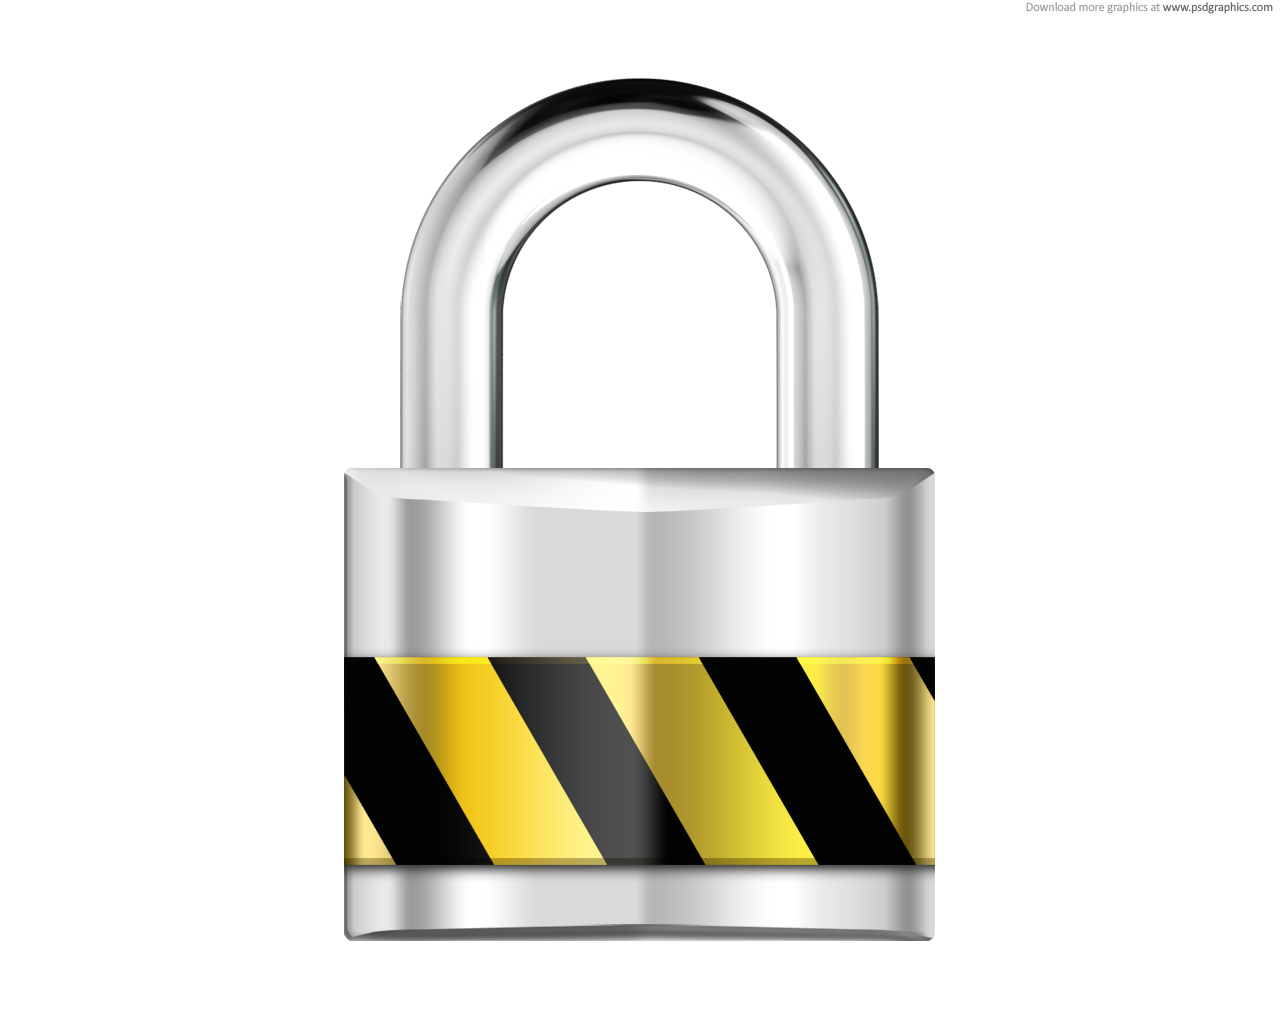 13 Padlock Vector Free Cliparts That You Can Download To You Computer